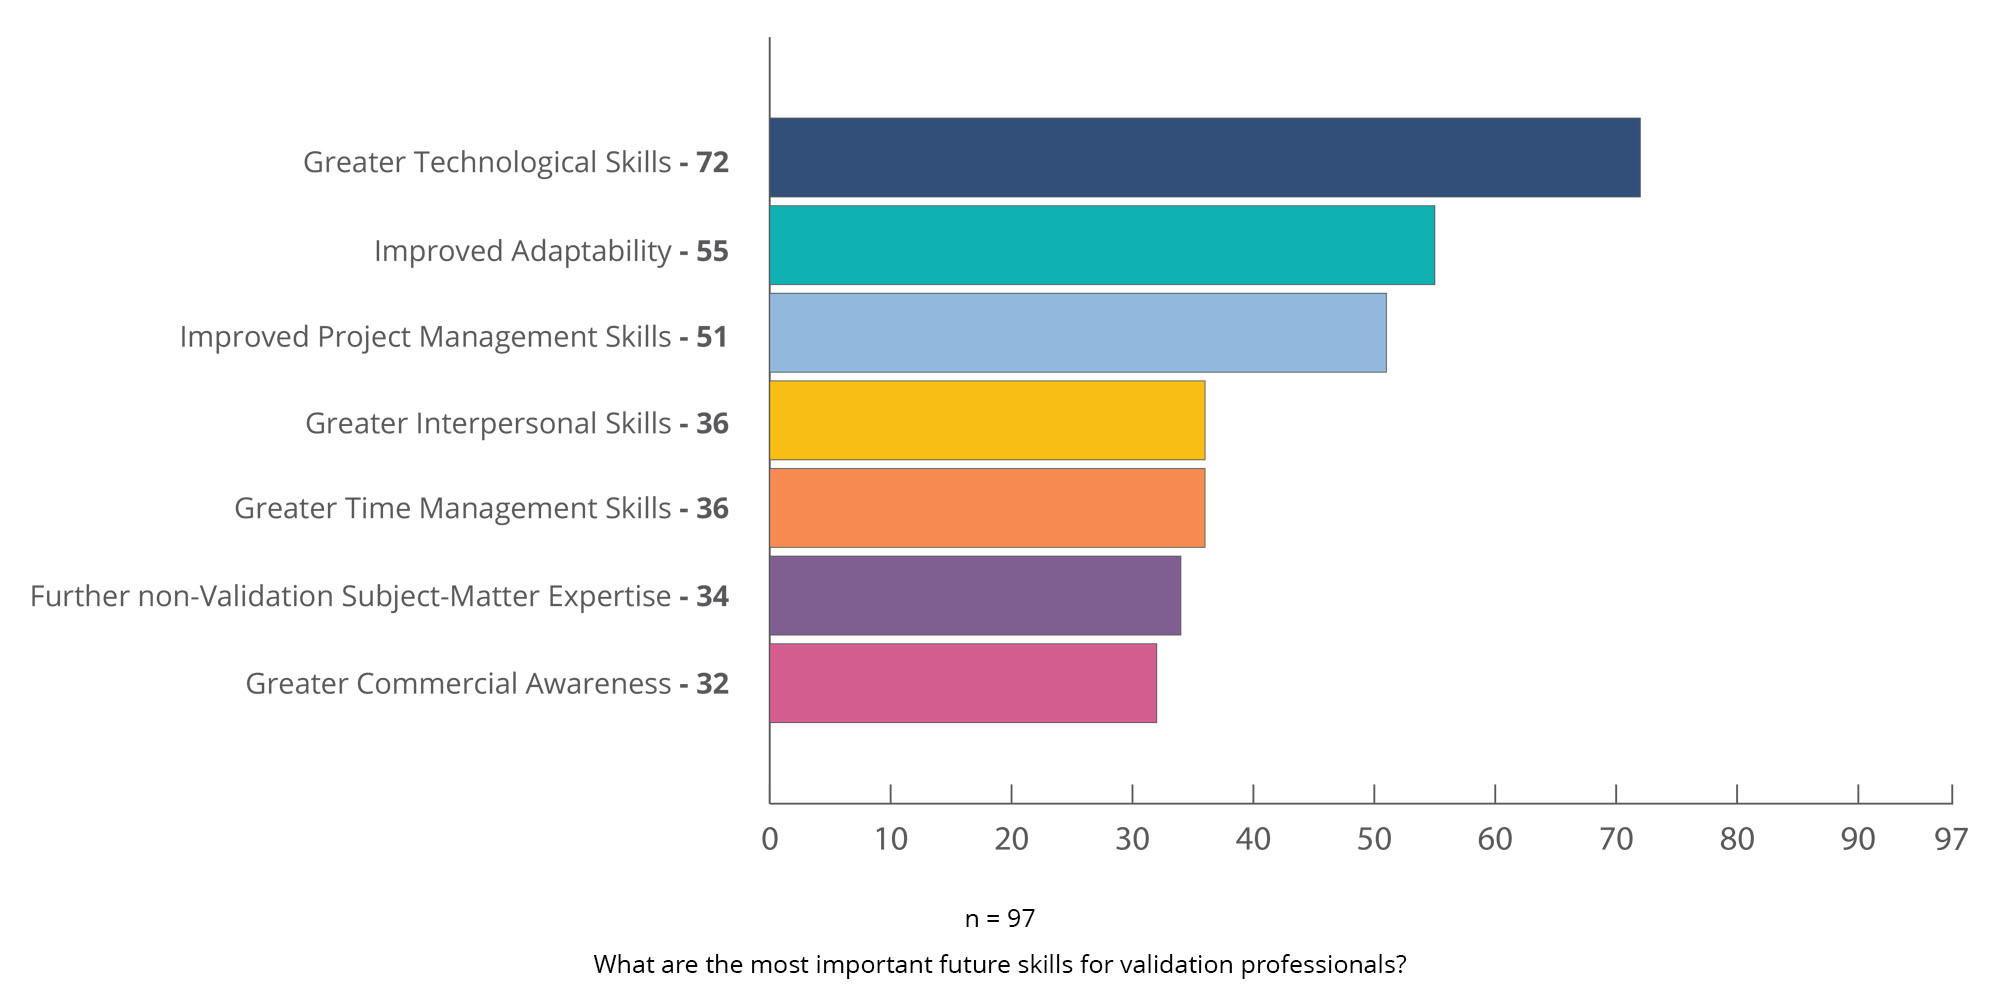 What are the most important future skills for validation professionals?  